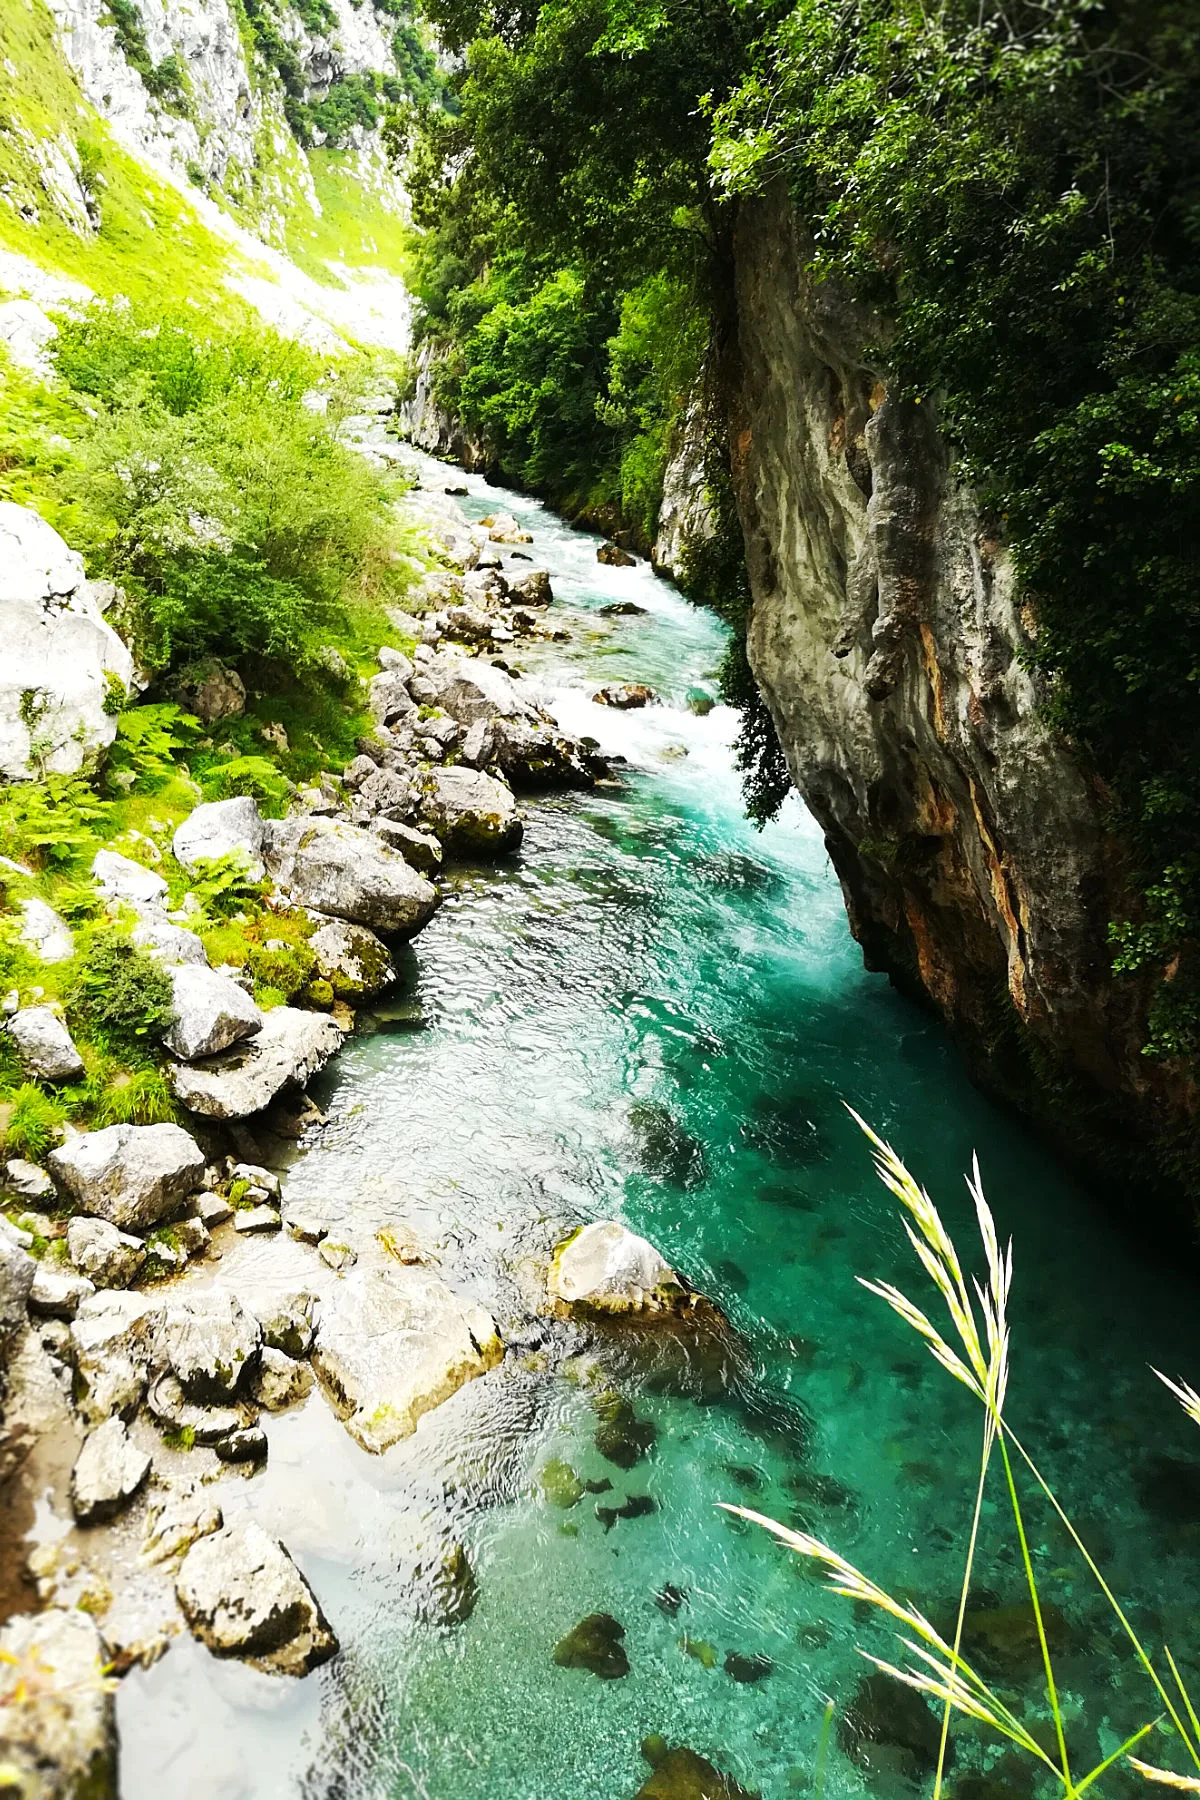 A turquoise river beside some rocky cliffs and lush green forrest.